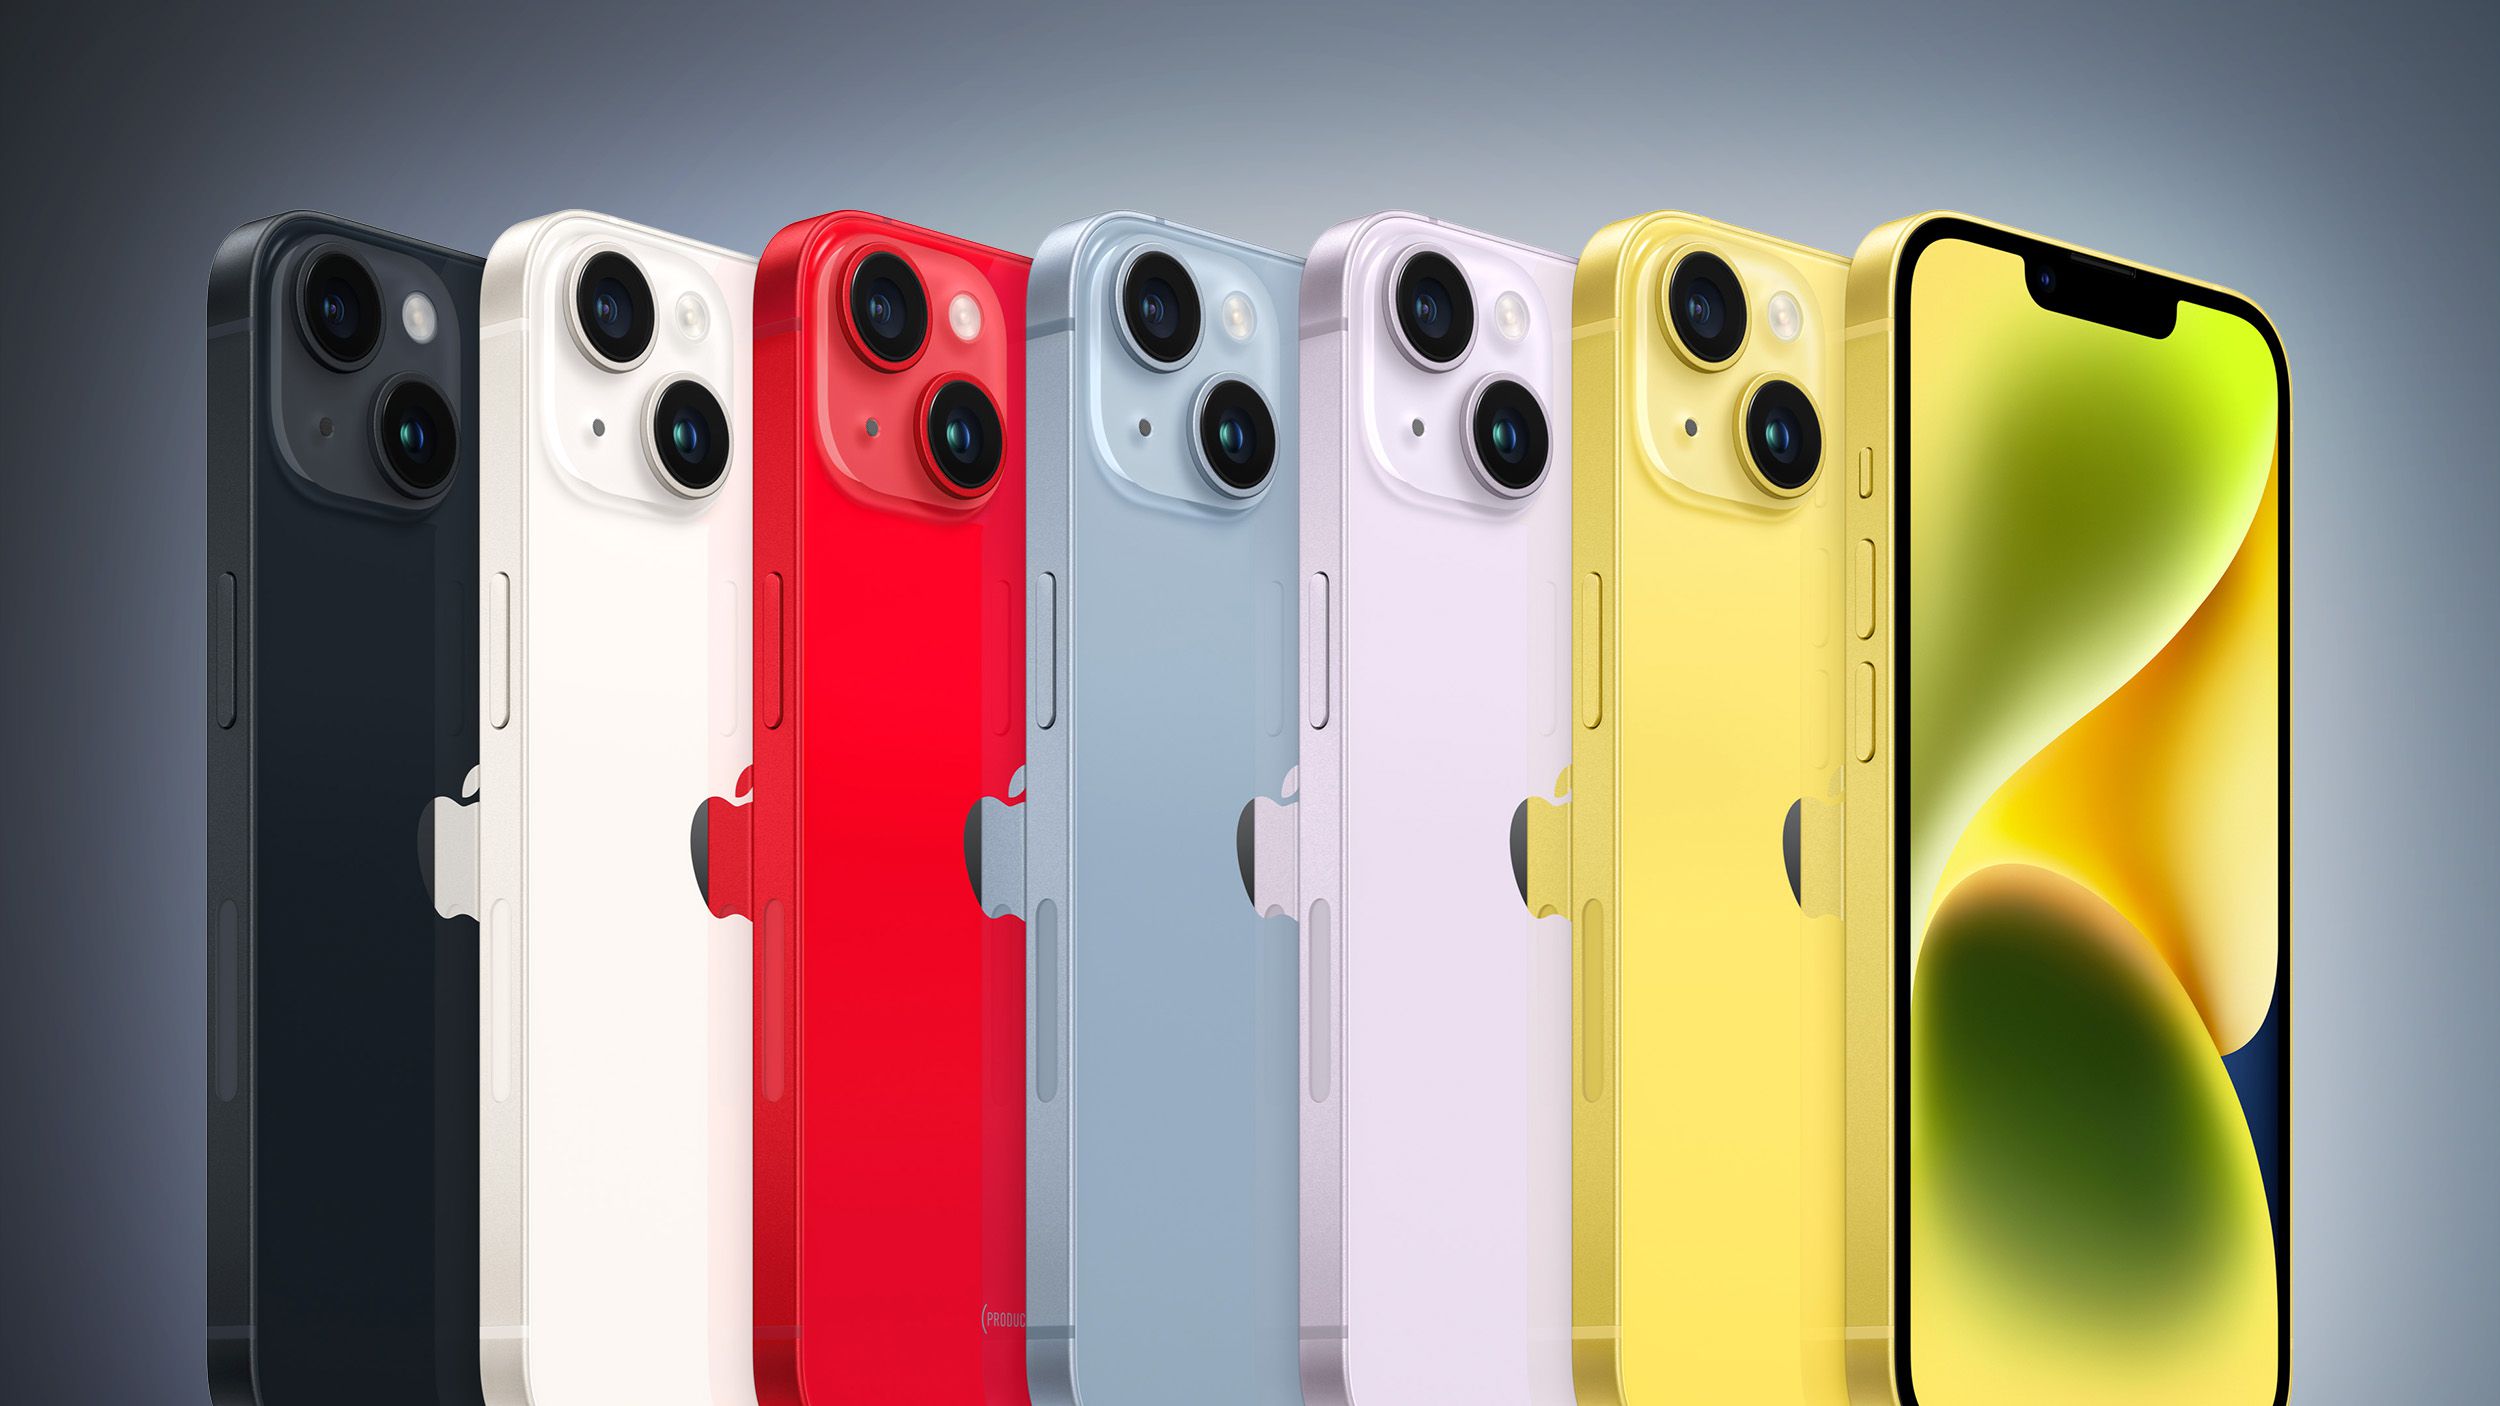 Which Colour looks best in iPhone 14?